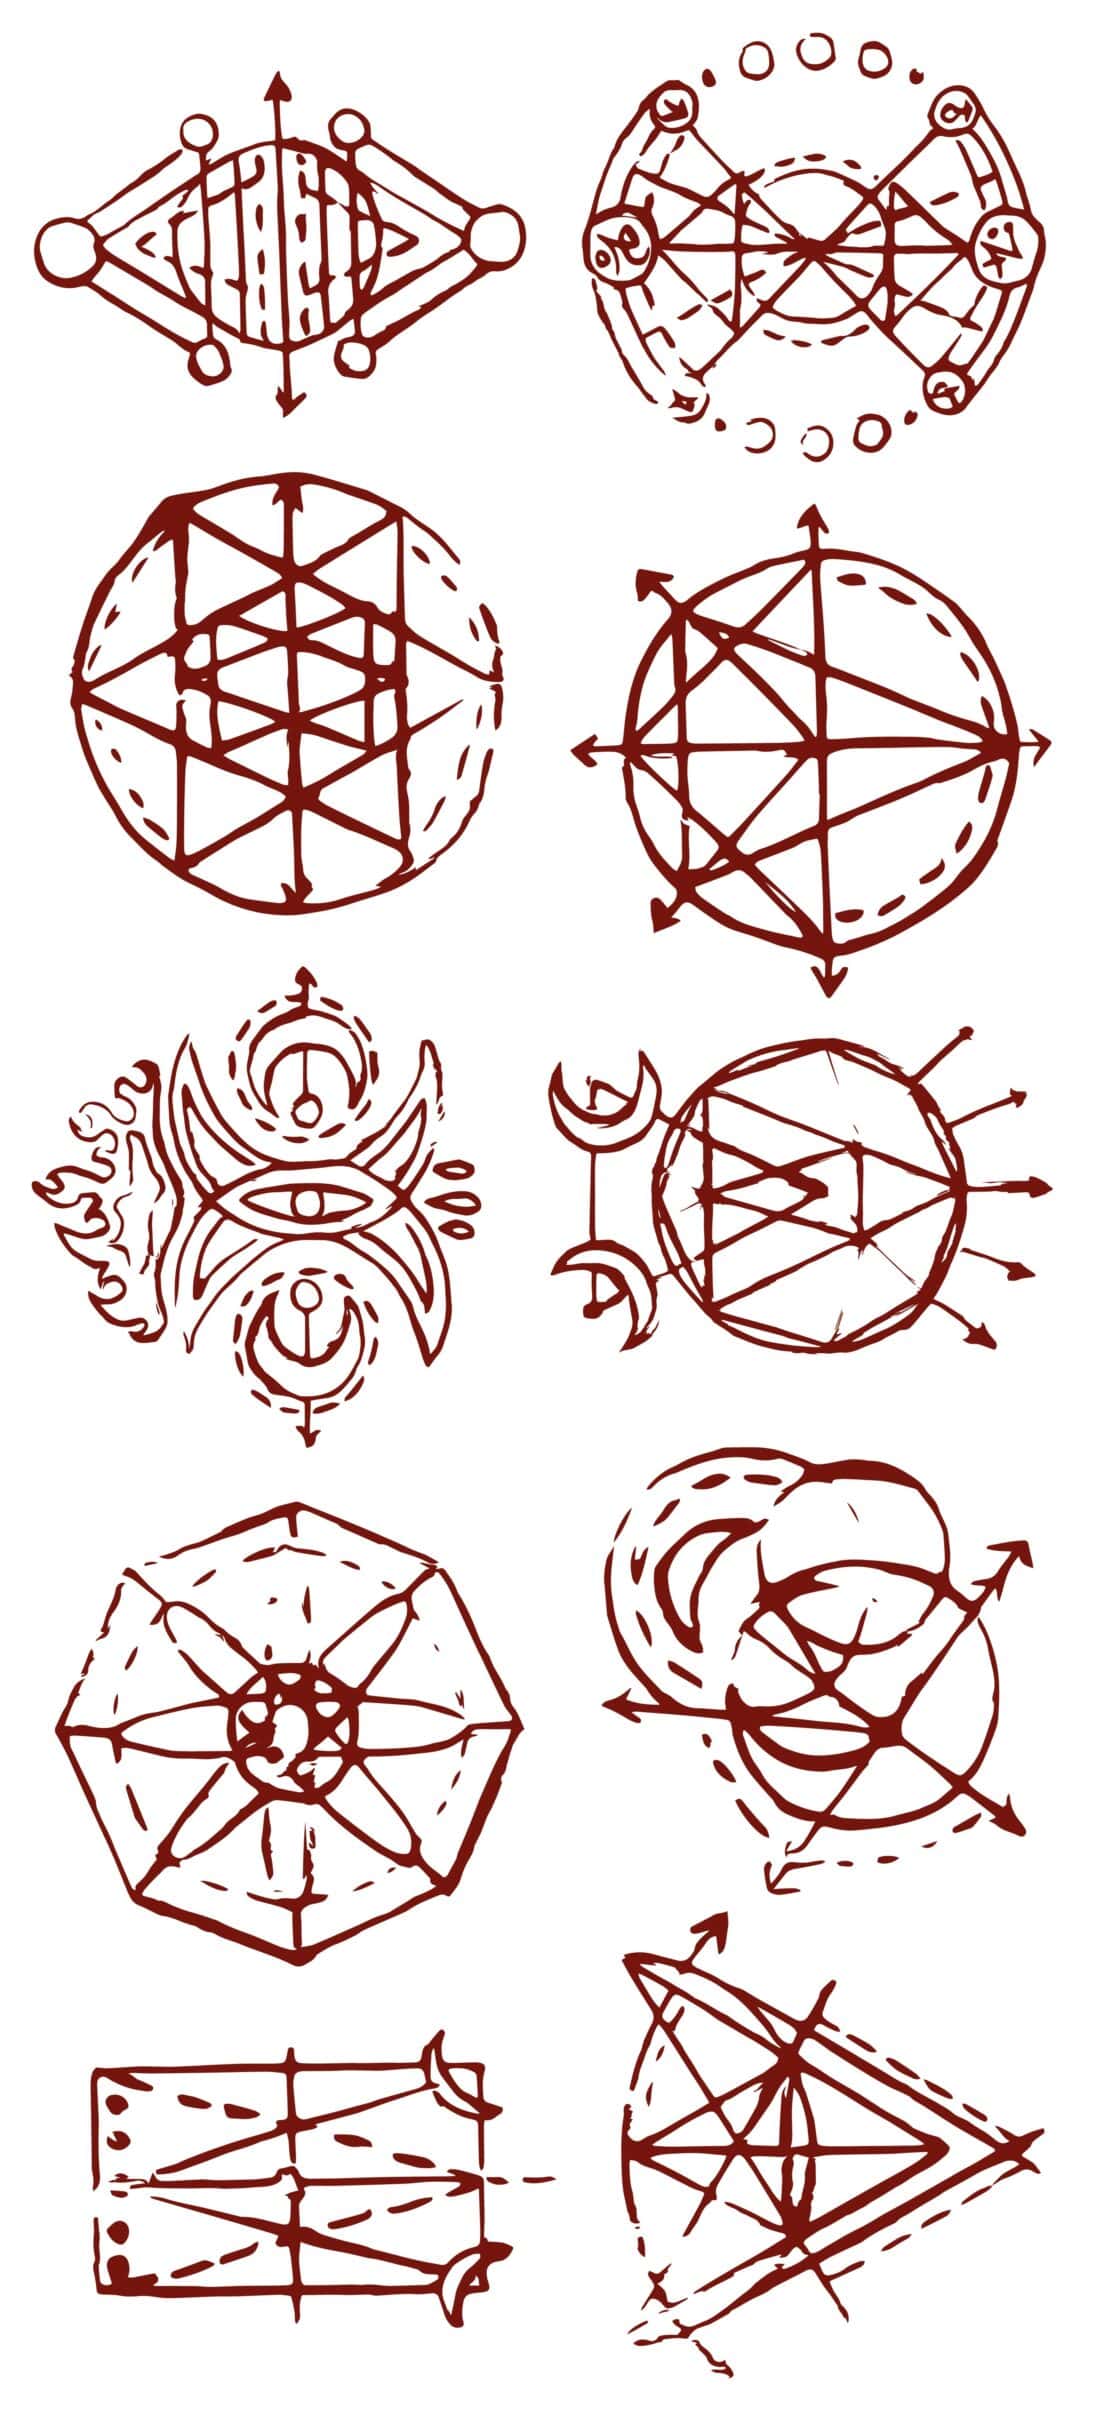 A collection of ten abstract, geometric symbols drawn in brown ink. They vary in design, featuring circles, triangles, arrows, and intersecting lines, with some incorporating additional elements like dots, flames, or crescent shapes. Each symbol is distinct and complex—perfect for decorating your backyard yoga space.